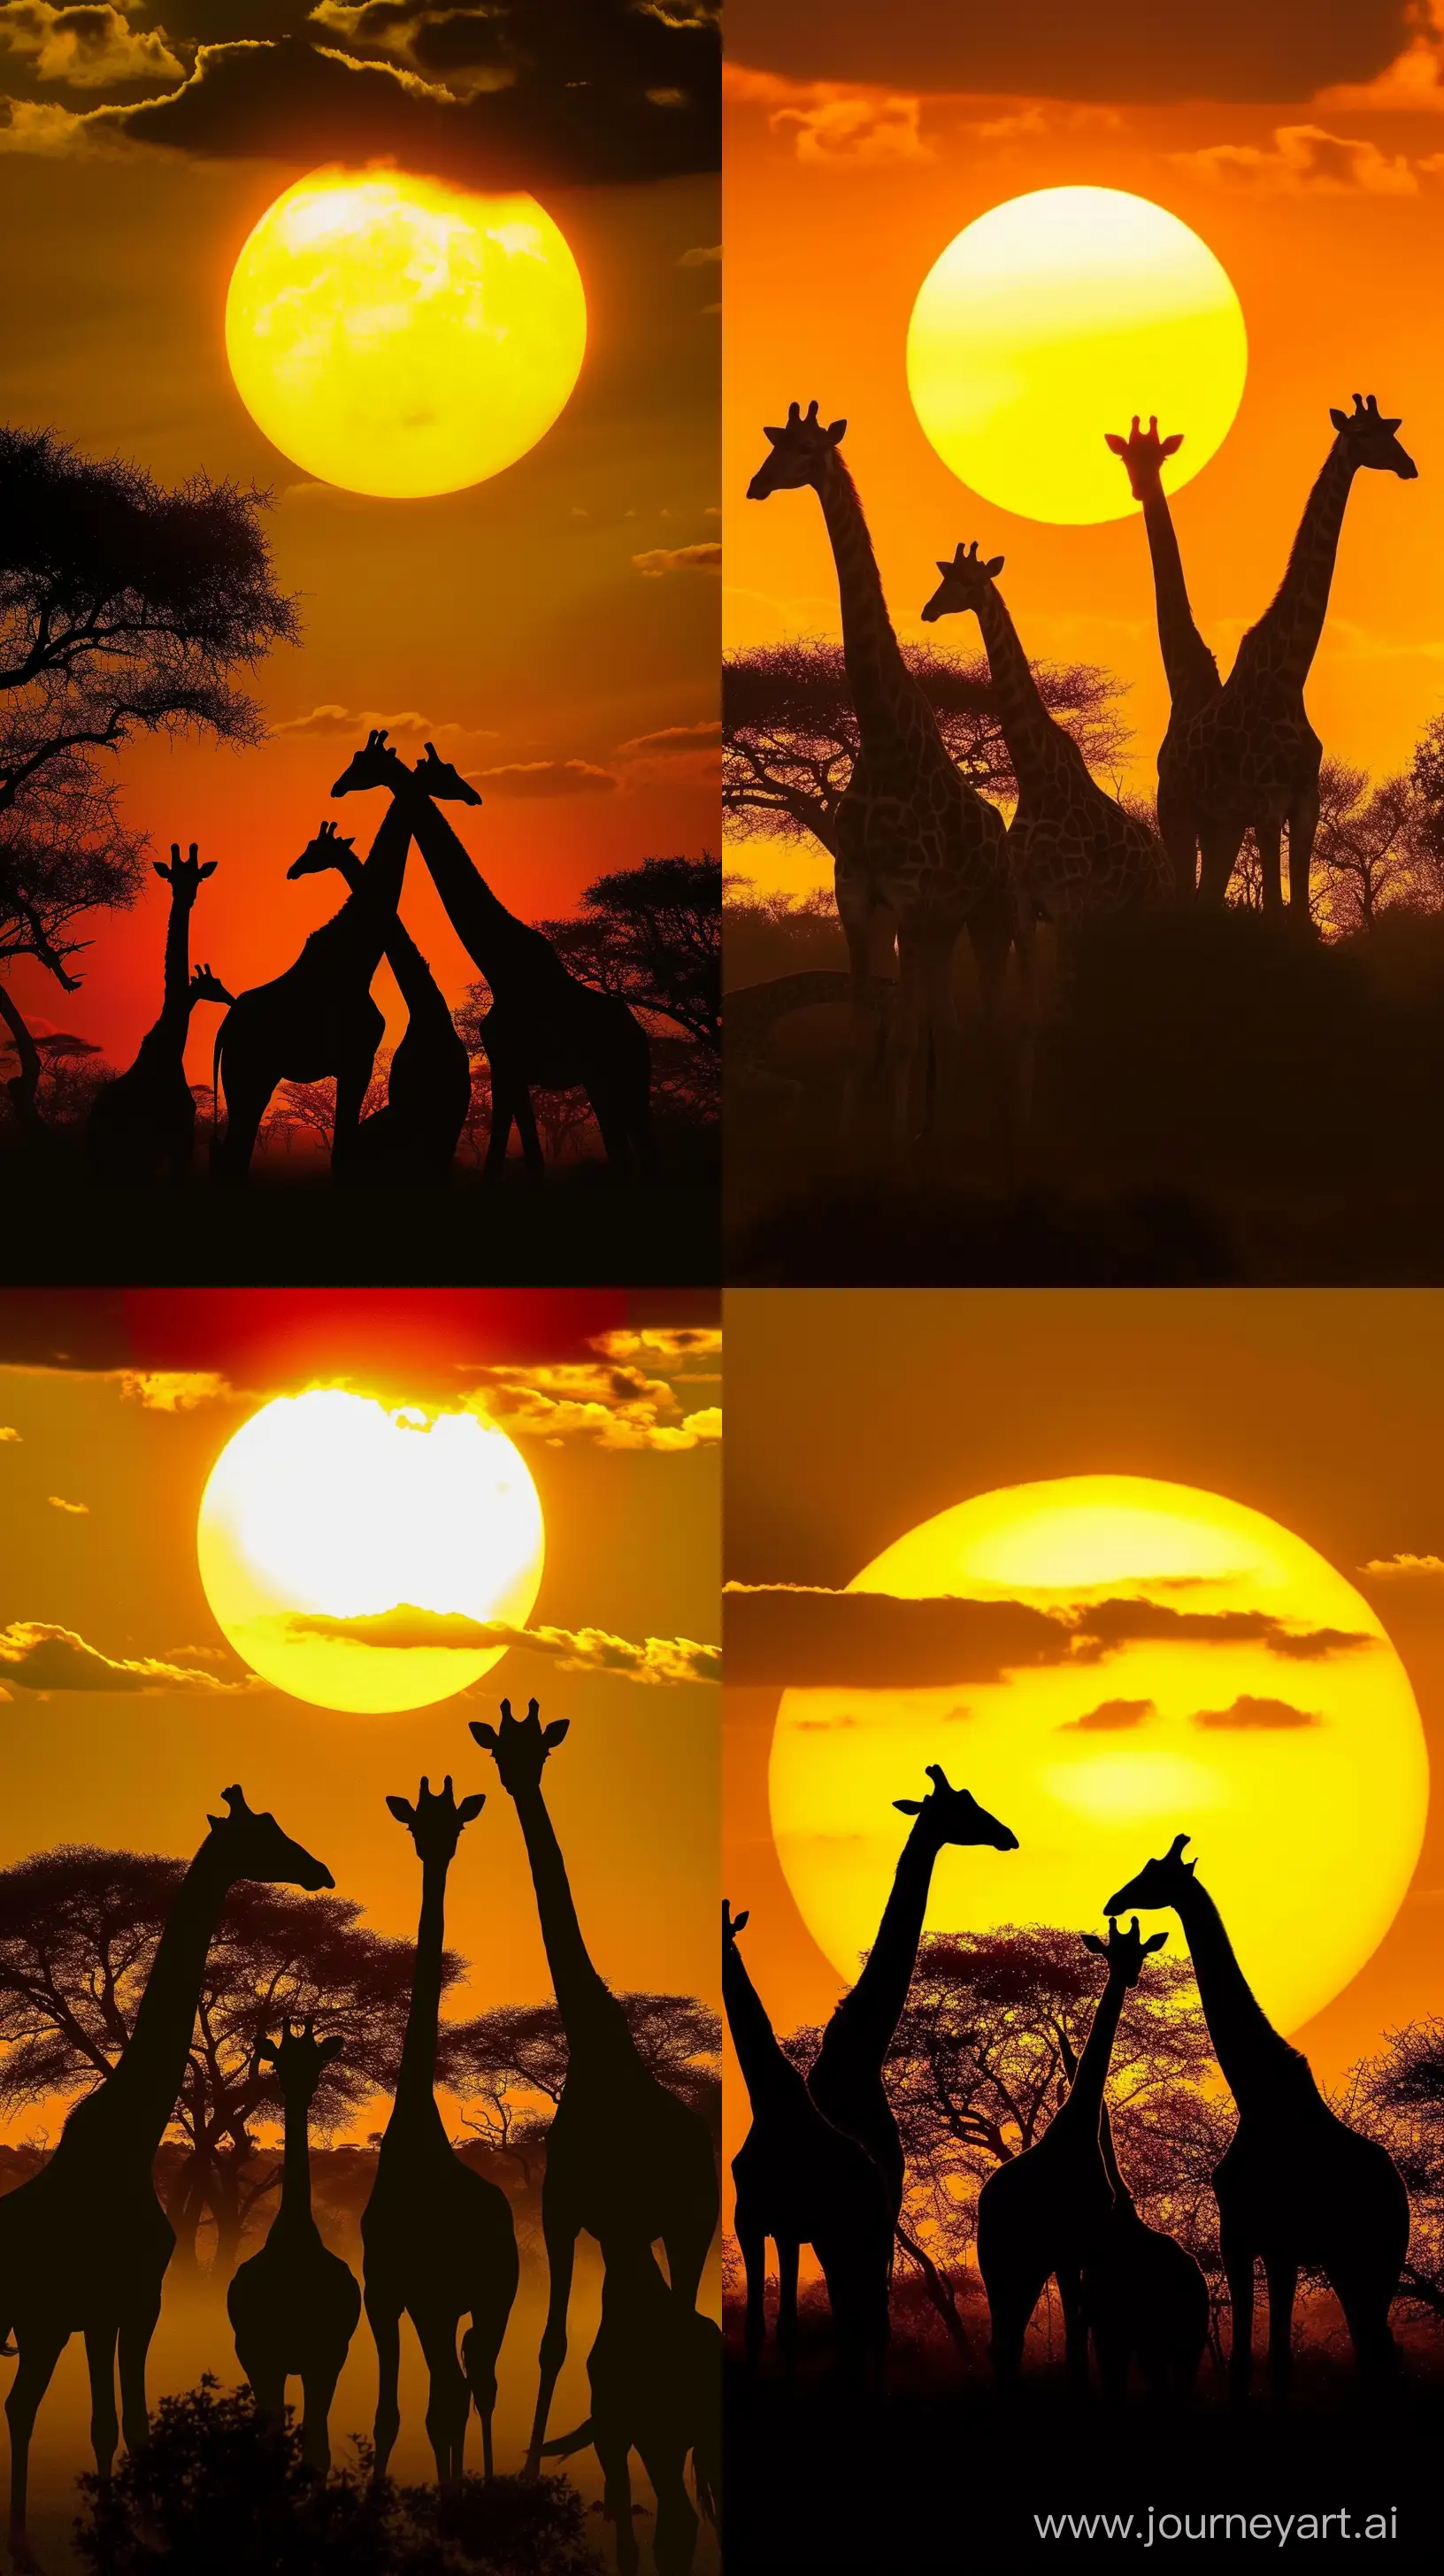 several giraffes in silhouette against a vibrant sunset. The sun is large and appears as a bright, glowing orb occupying the upper part of the image. Its color is a deep yellow, with hints of orange, and you can see some clouds partially covering it, adding texture to the sky. The sky itself is a gradient of warm colors, ranging from a soft yellow near the sun to deeper oranges and reds as it extends outwards. Below the sun, the silhouettes of at least four giraffes are visible. They are in profile, and their distinctive long necks and the patterns of their coats are clearly outlined against the bright background. The giraffes are of varying sizes and facing different directions, which suggests depth and perspective in the image. there are the dark, shadowy shapes of trees, likely acacia trees,  African savannah landscapes. The trees have sparse foliage and are also in silhouette. --ar 9:16